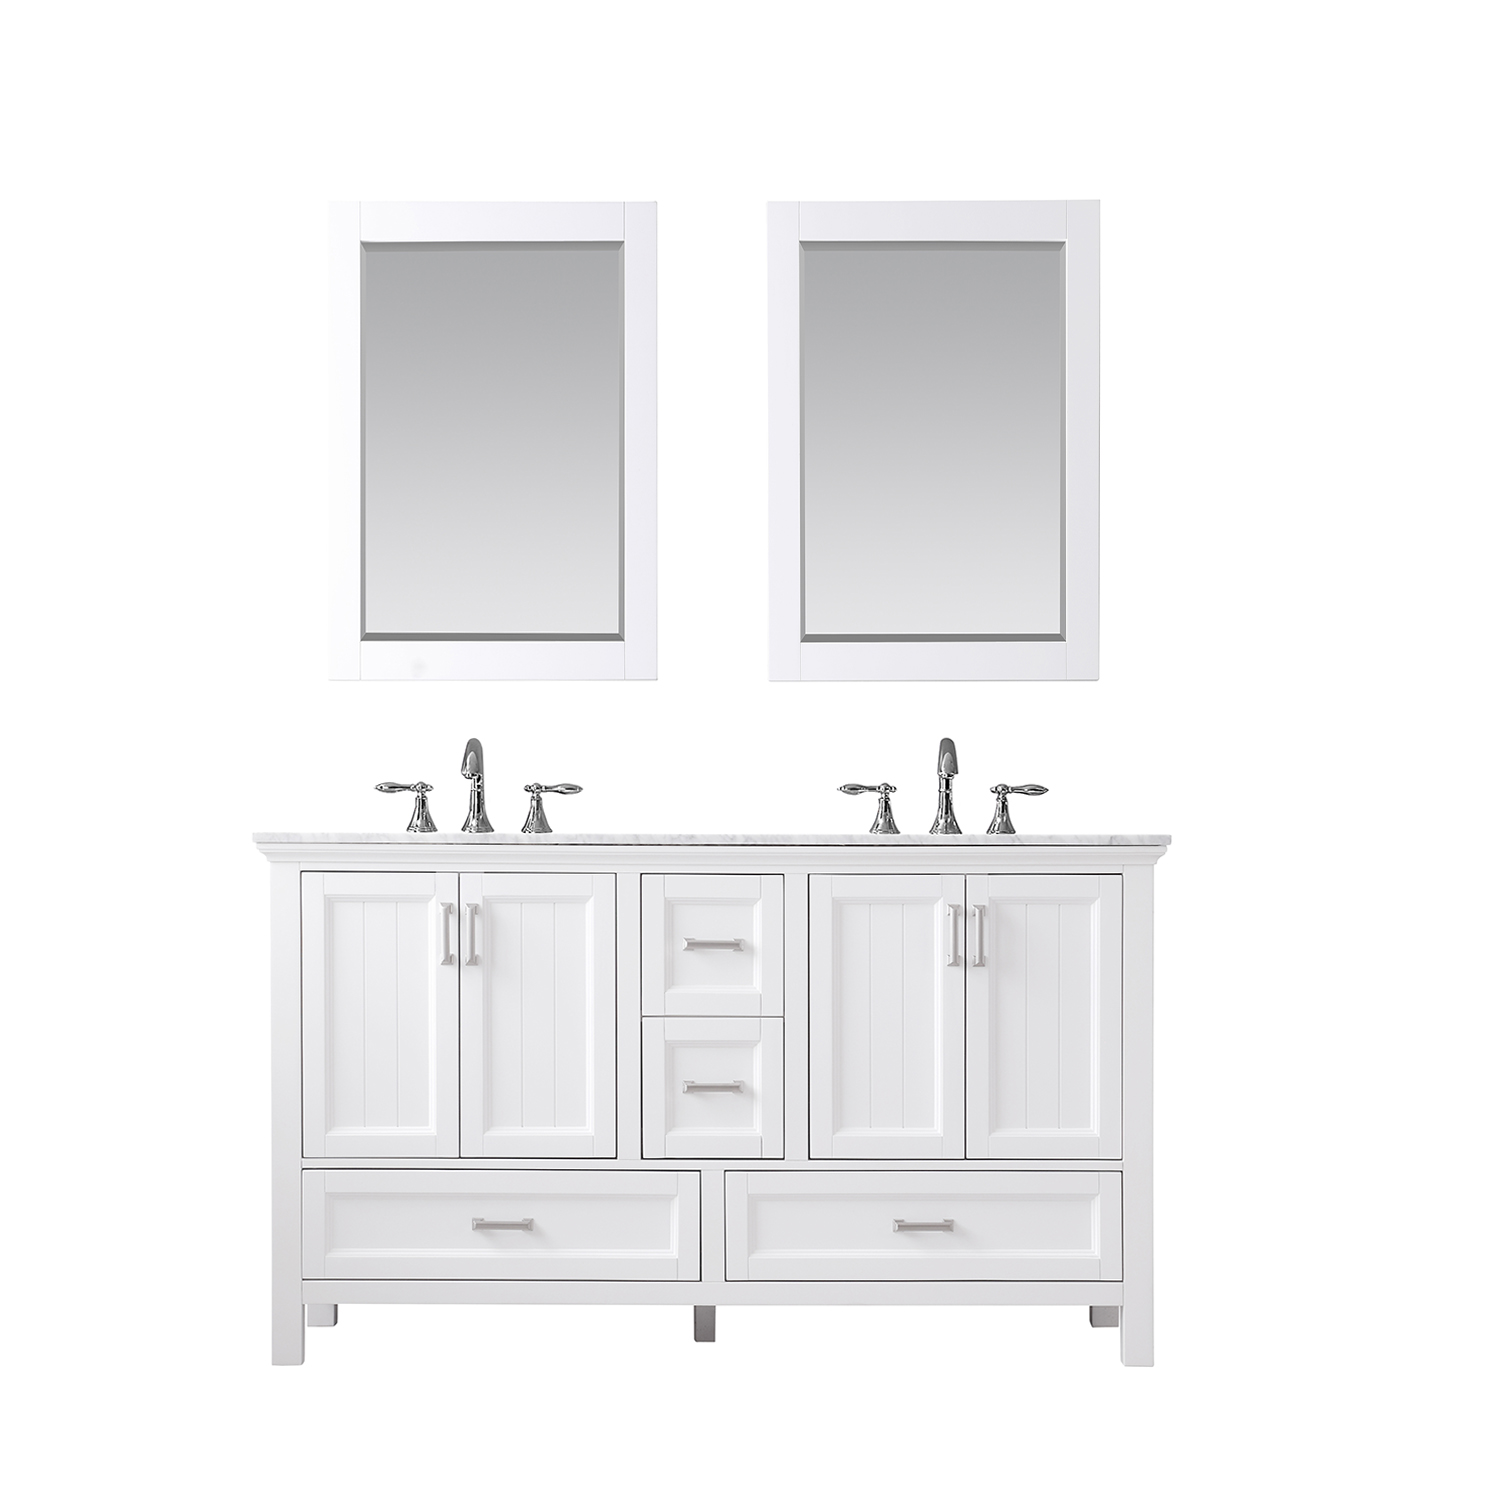 Issac Edwards Collection 60" Double Bathroom Vanity Set in White and Carrara White Marble Countertop without Mirror 